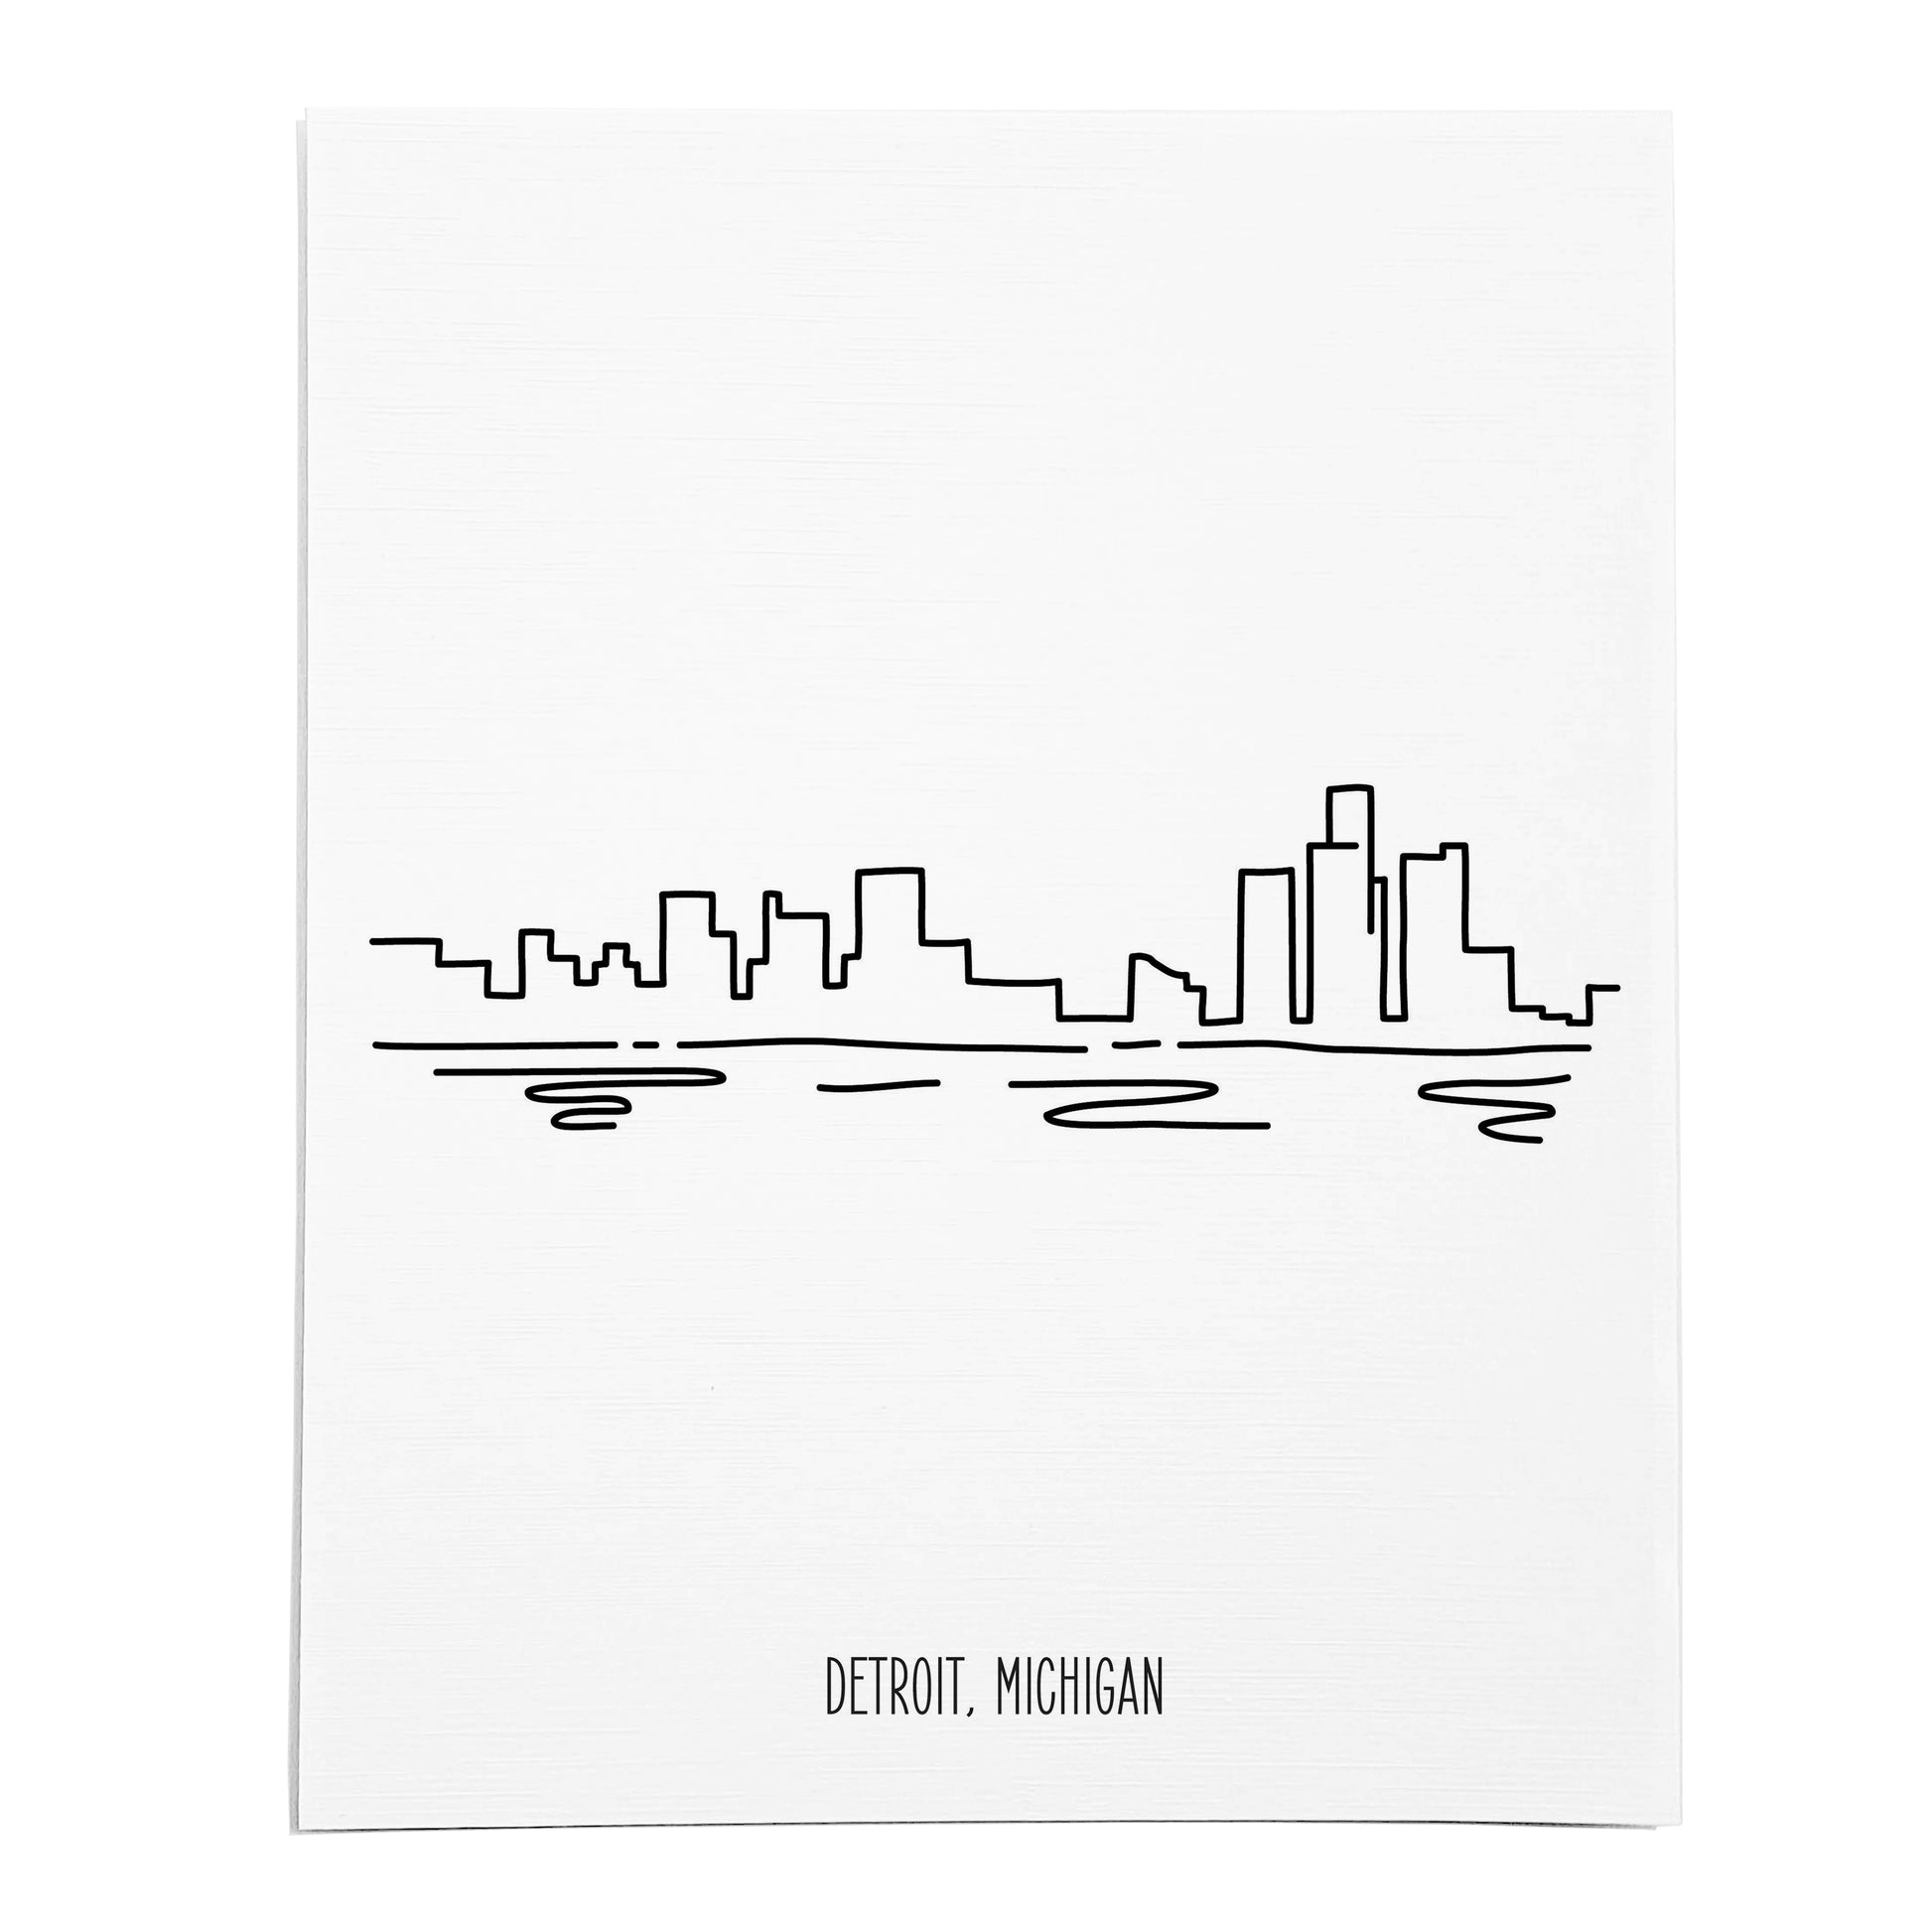 An art print featuring a line drawing of the Detroit Skyline on white linen paper